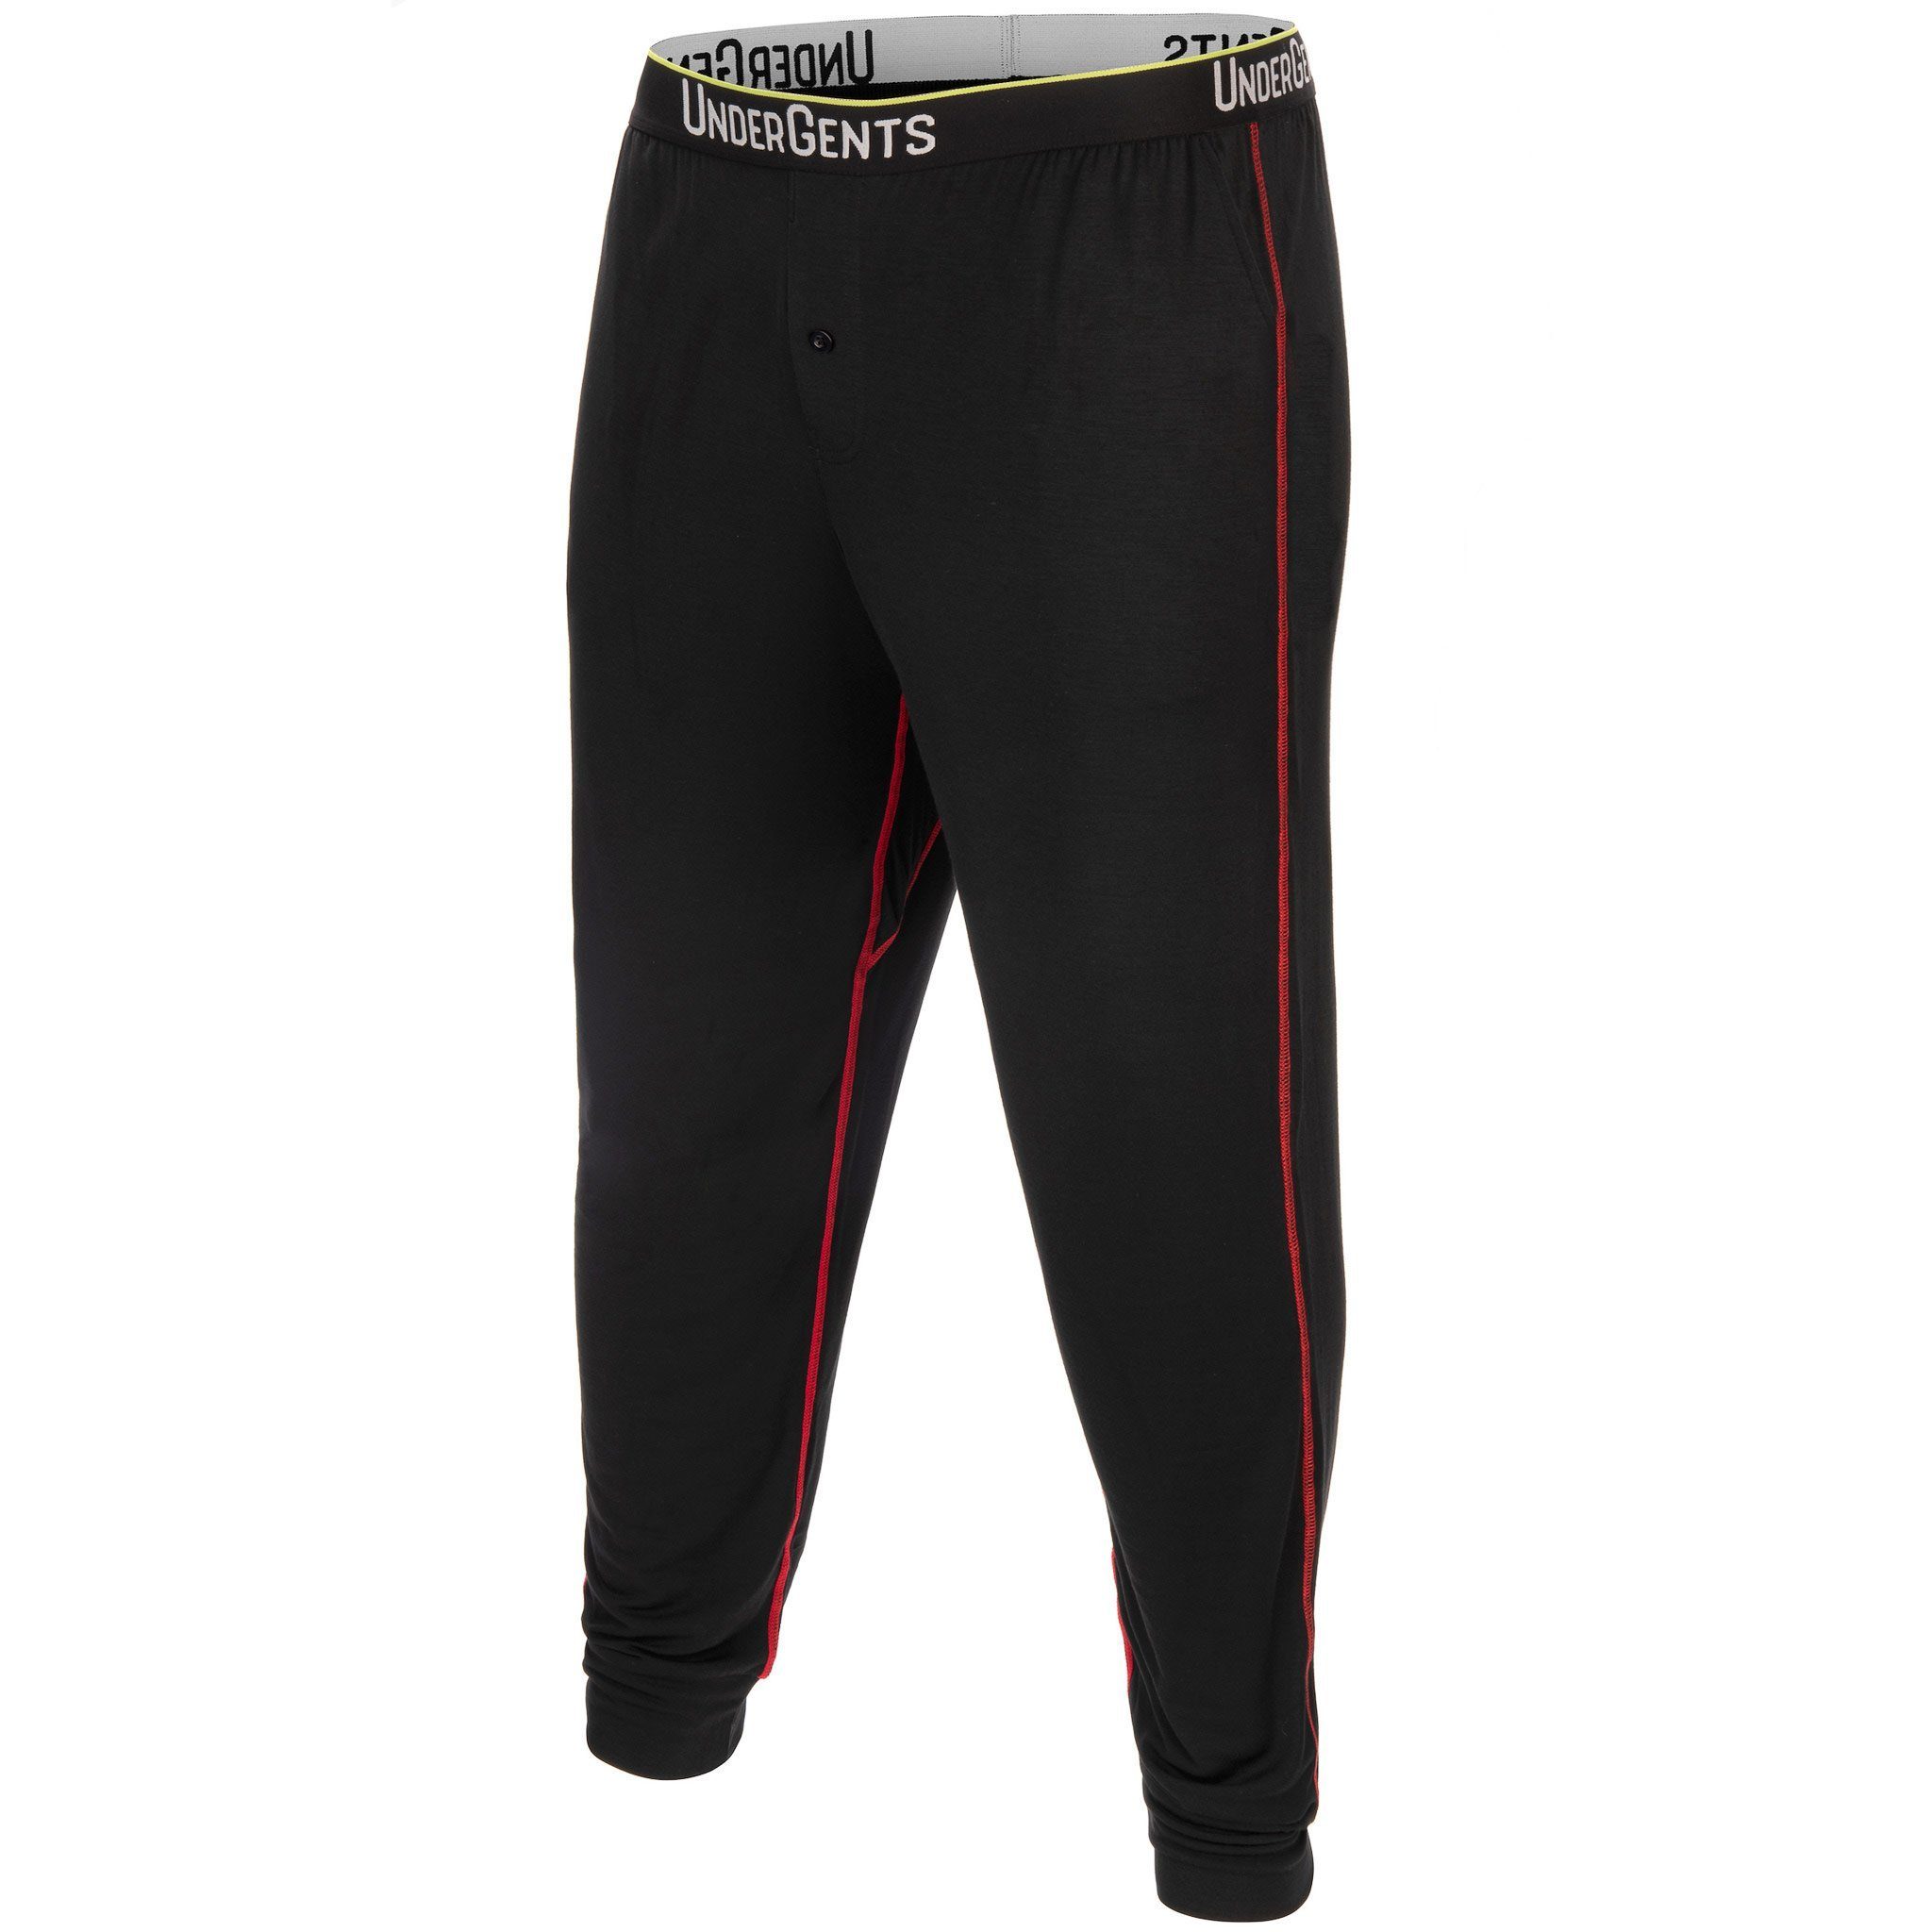 Swagger Lounge Pant – Undergents